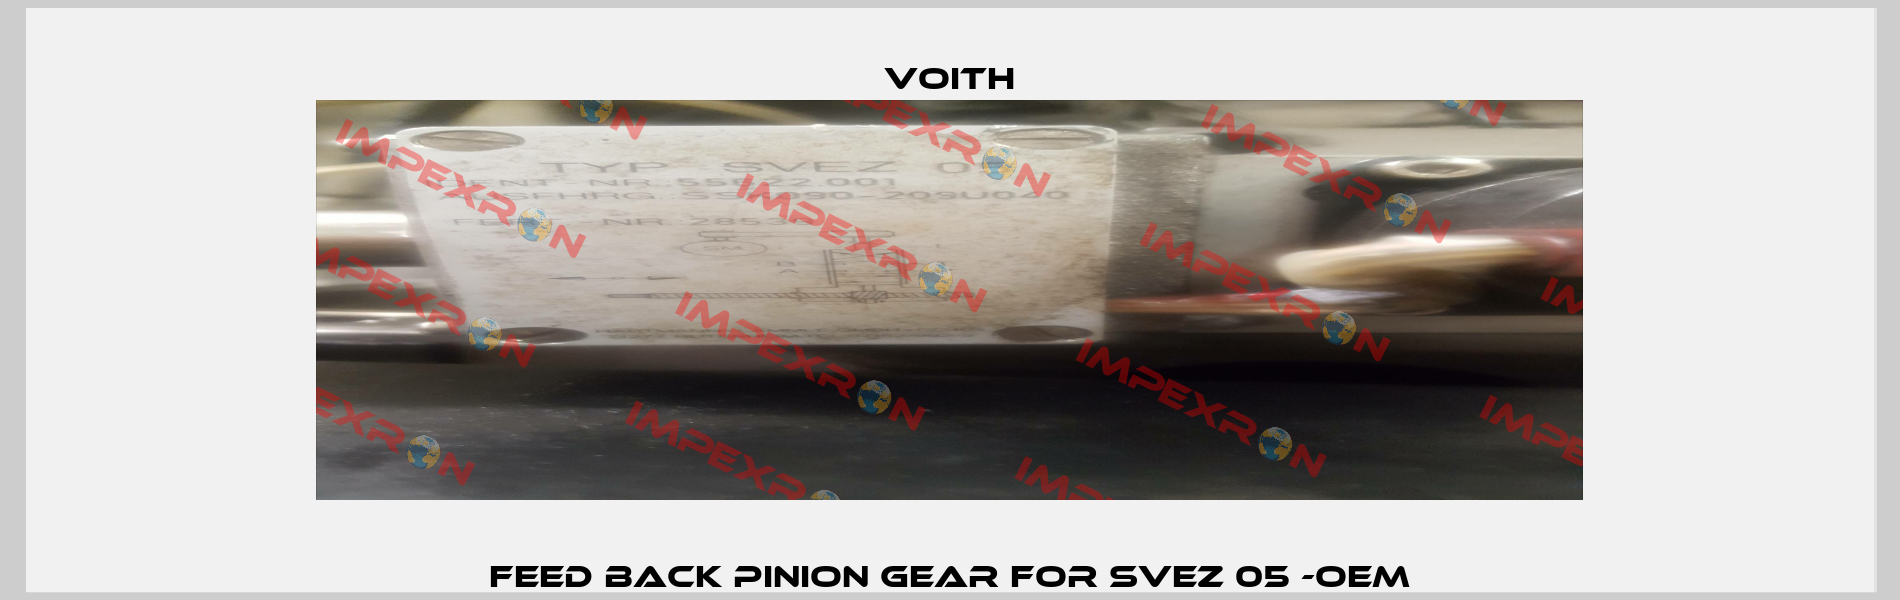 FEED BACK PINION GEAR FOR SVEZ 05 -OEM Voith